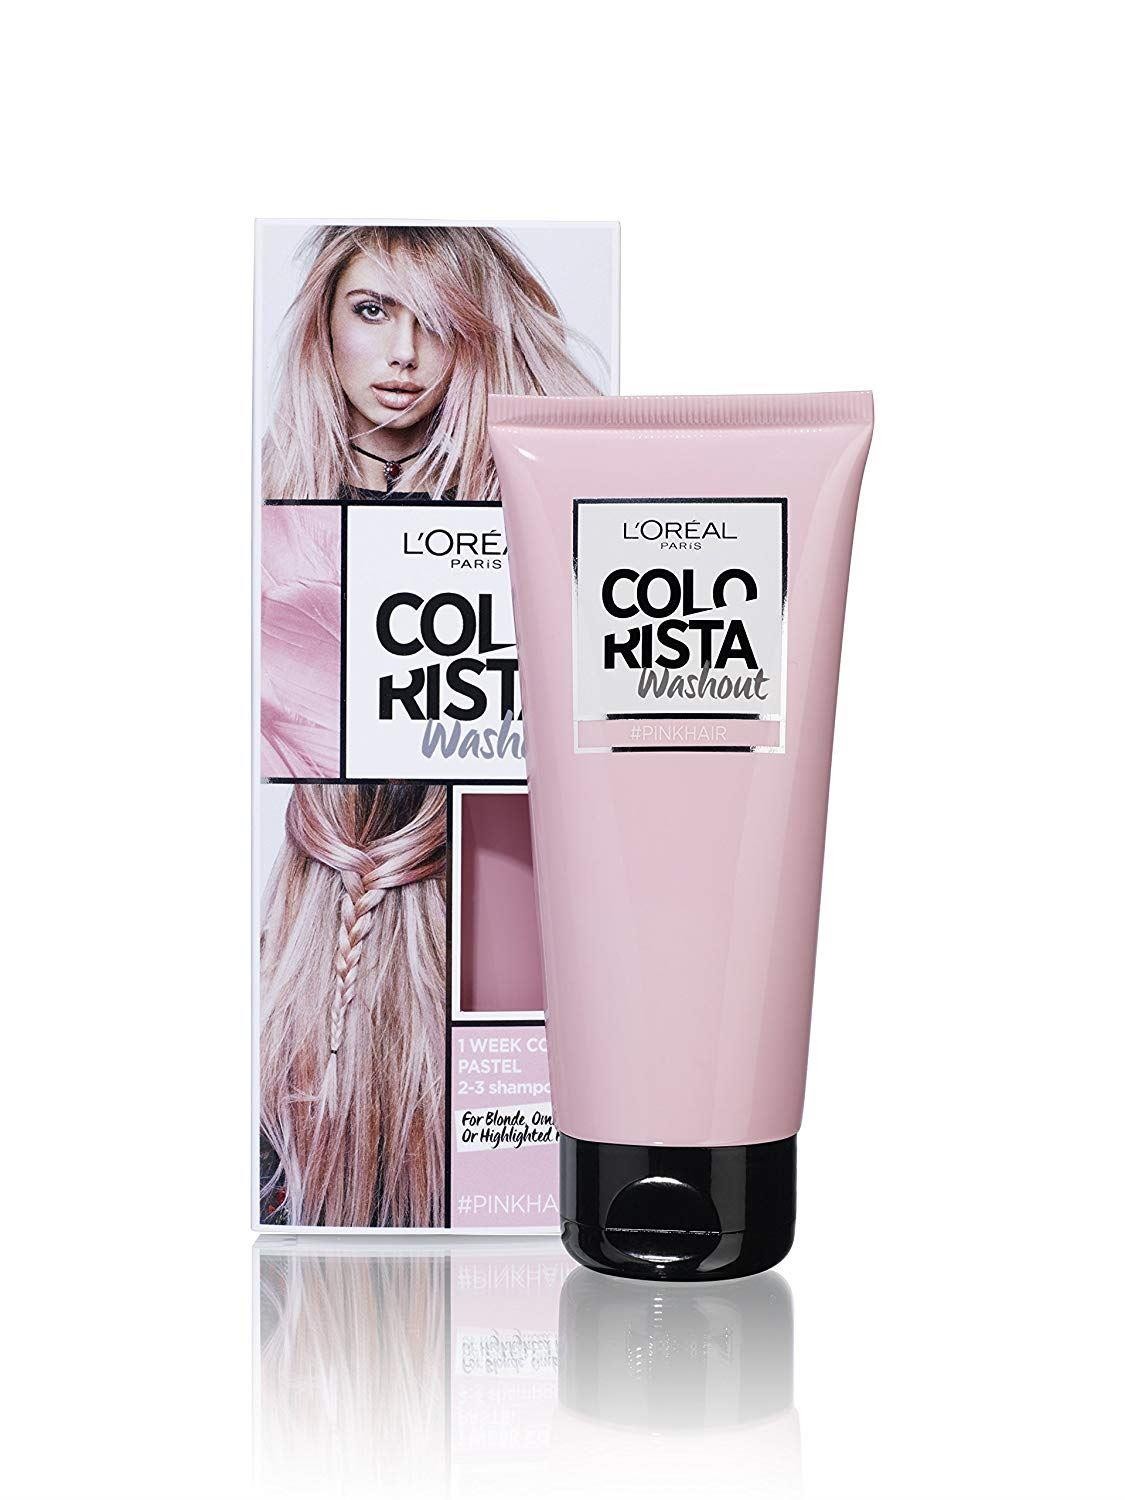 L'Oreal Colorista Washout Temporary Hair Dye, Pink, Lasts 2-3 Washes